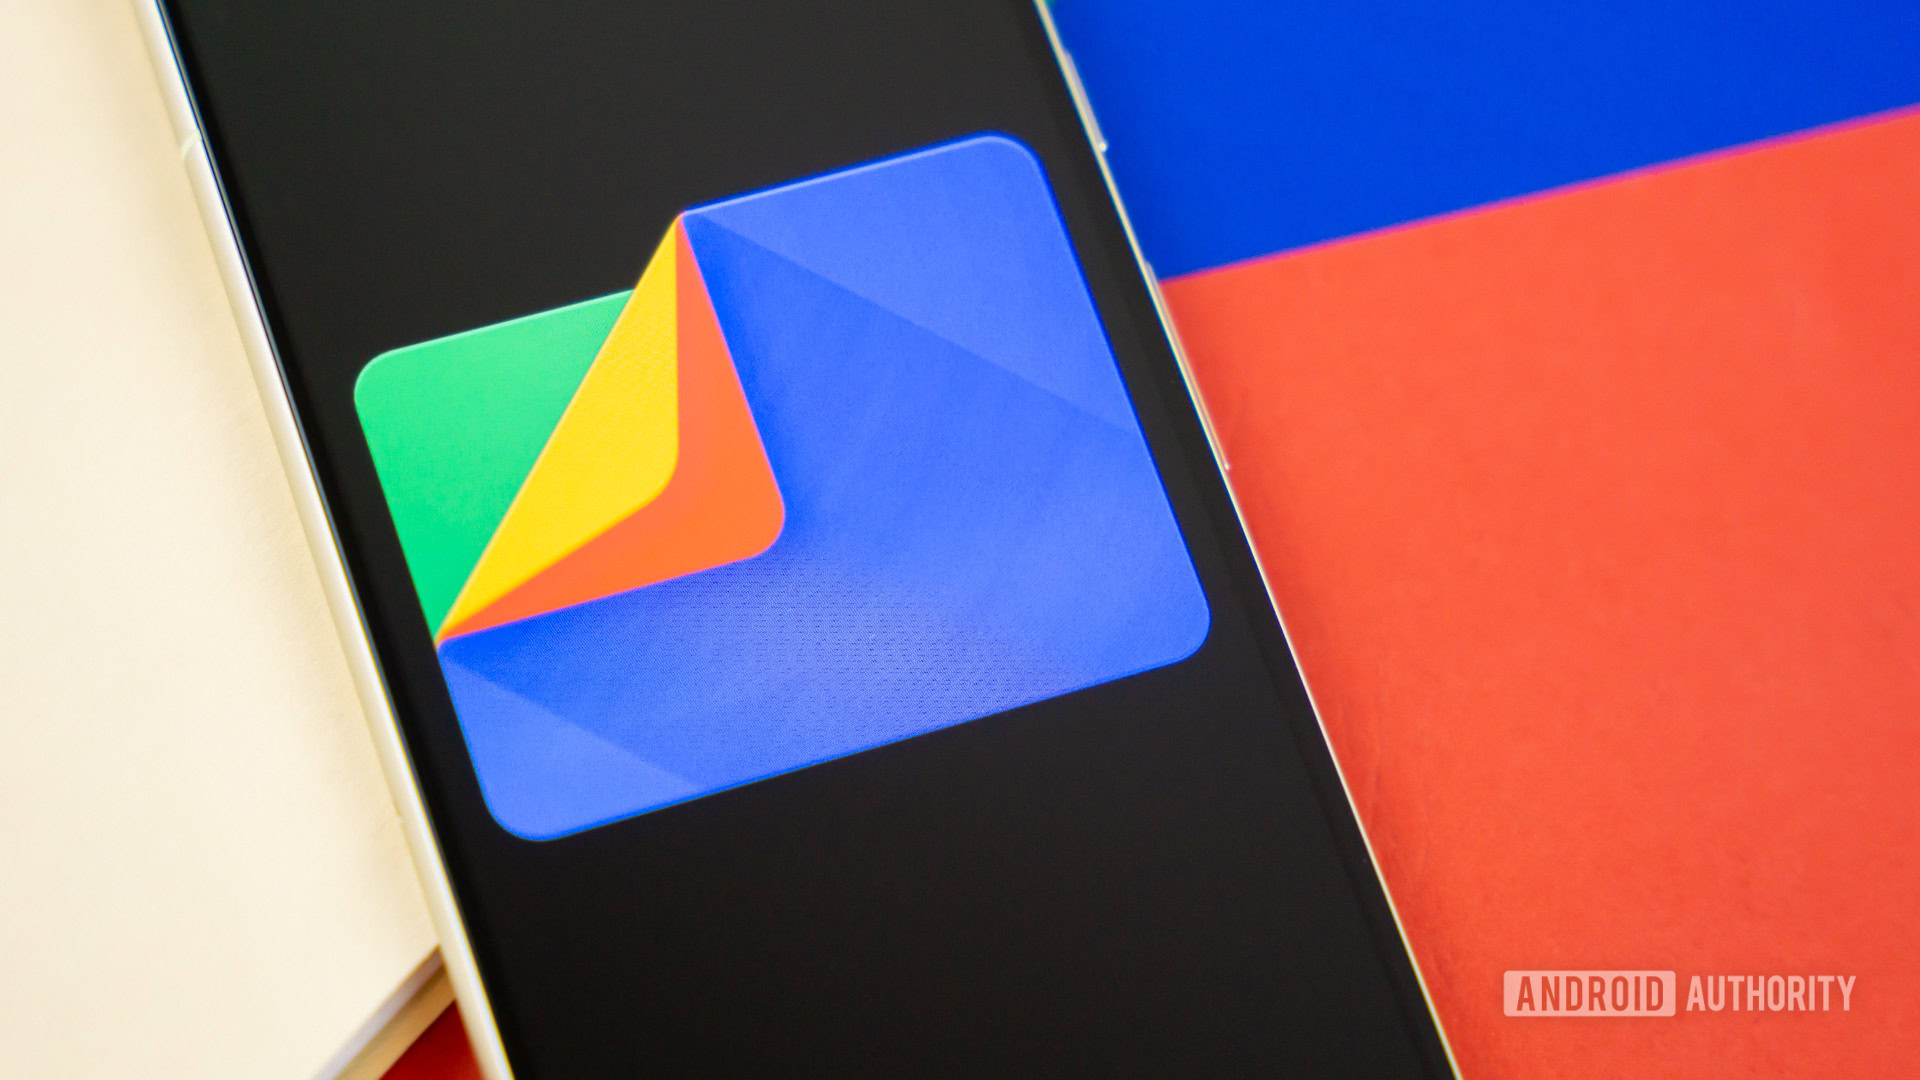 Google Files app logo on smartphone with manila folder and colorful background Stock photo 6